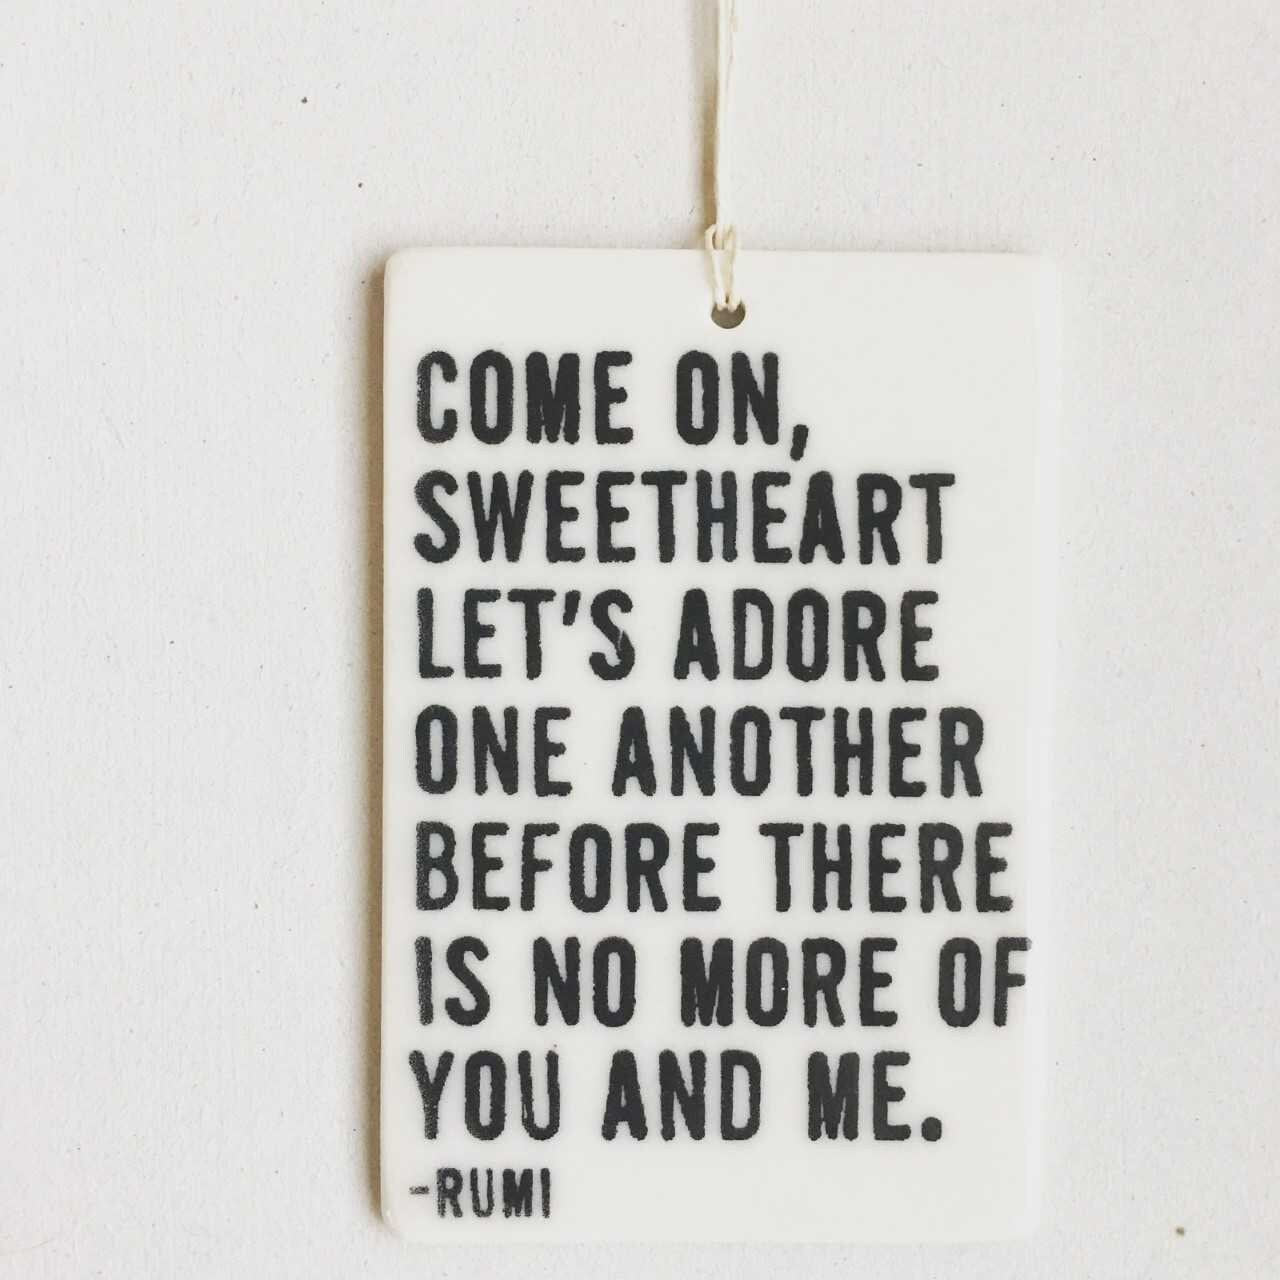 rumi quote | rumi wall hanging | rumi wall art | rumi poetry | rumi poem| ceramic wall tag | gift for spouse | valentines day | lovers